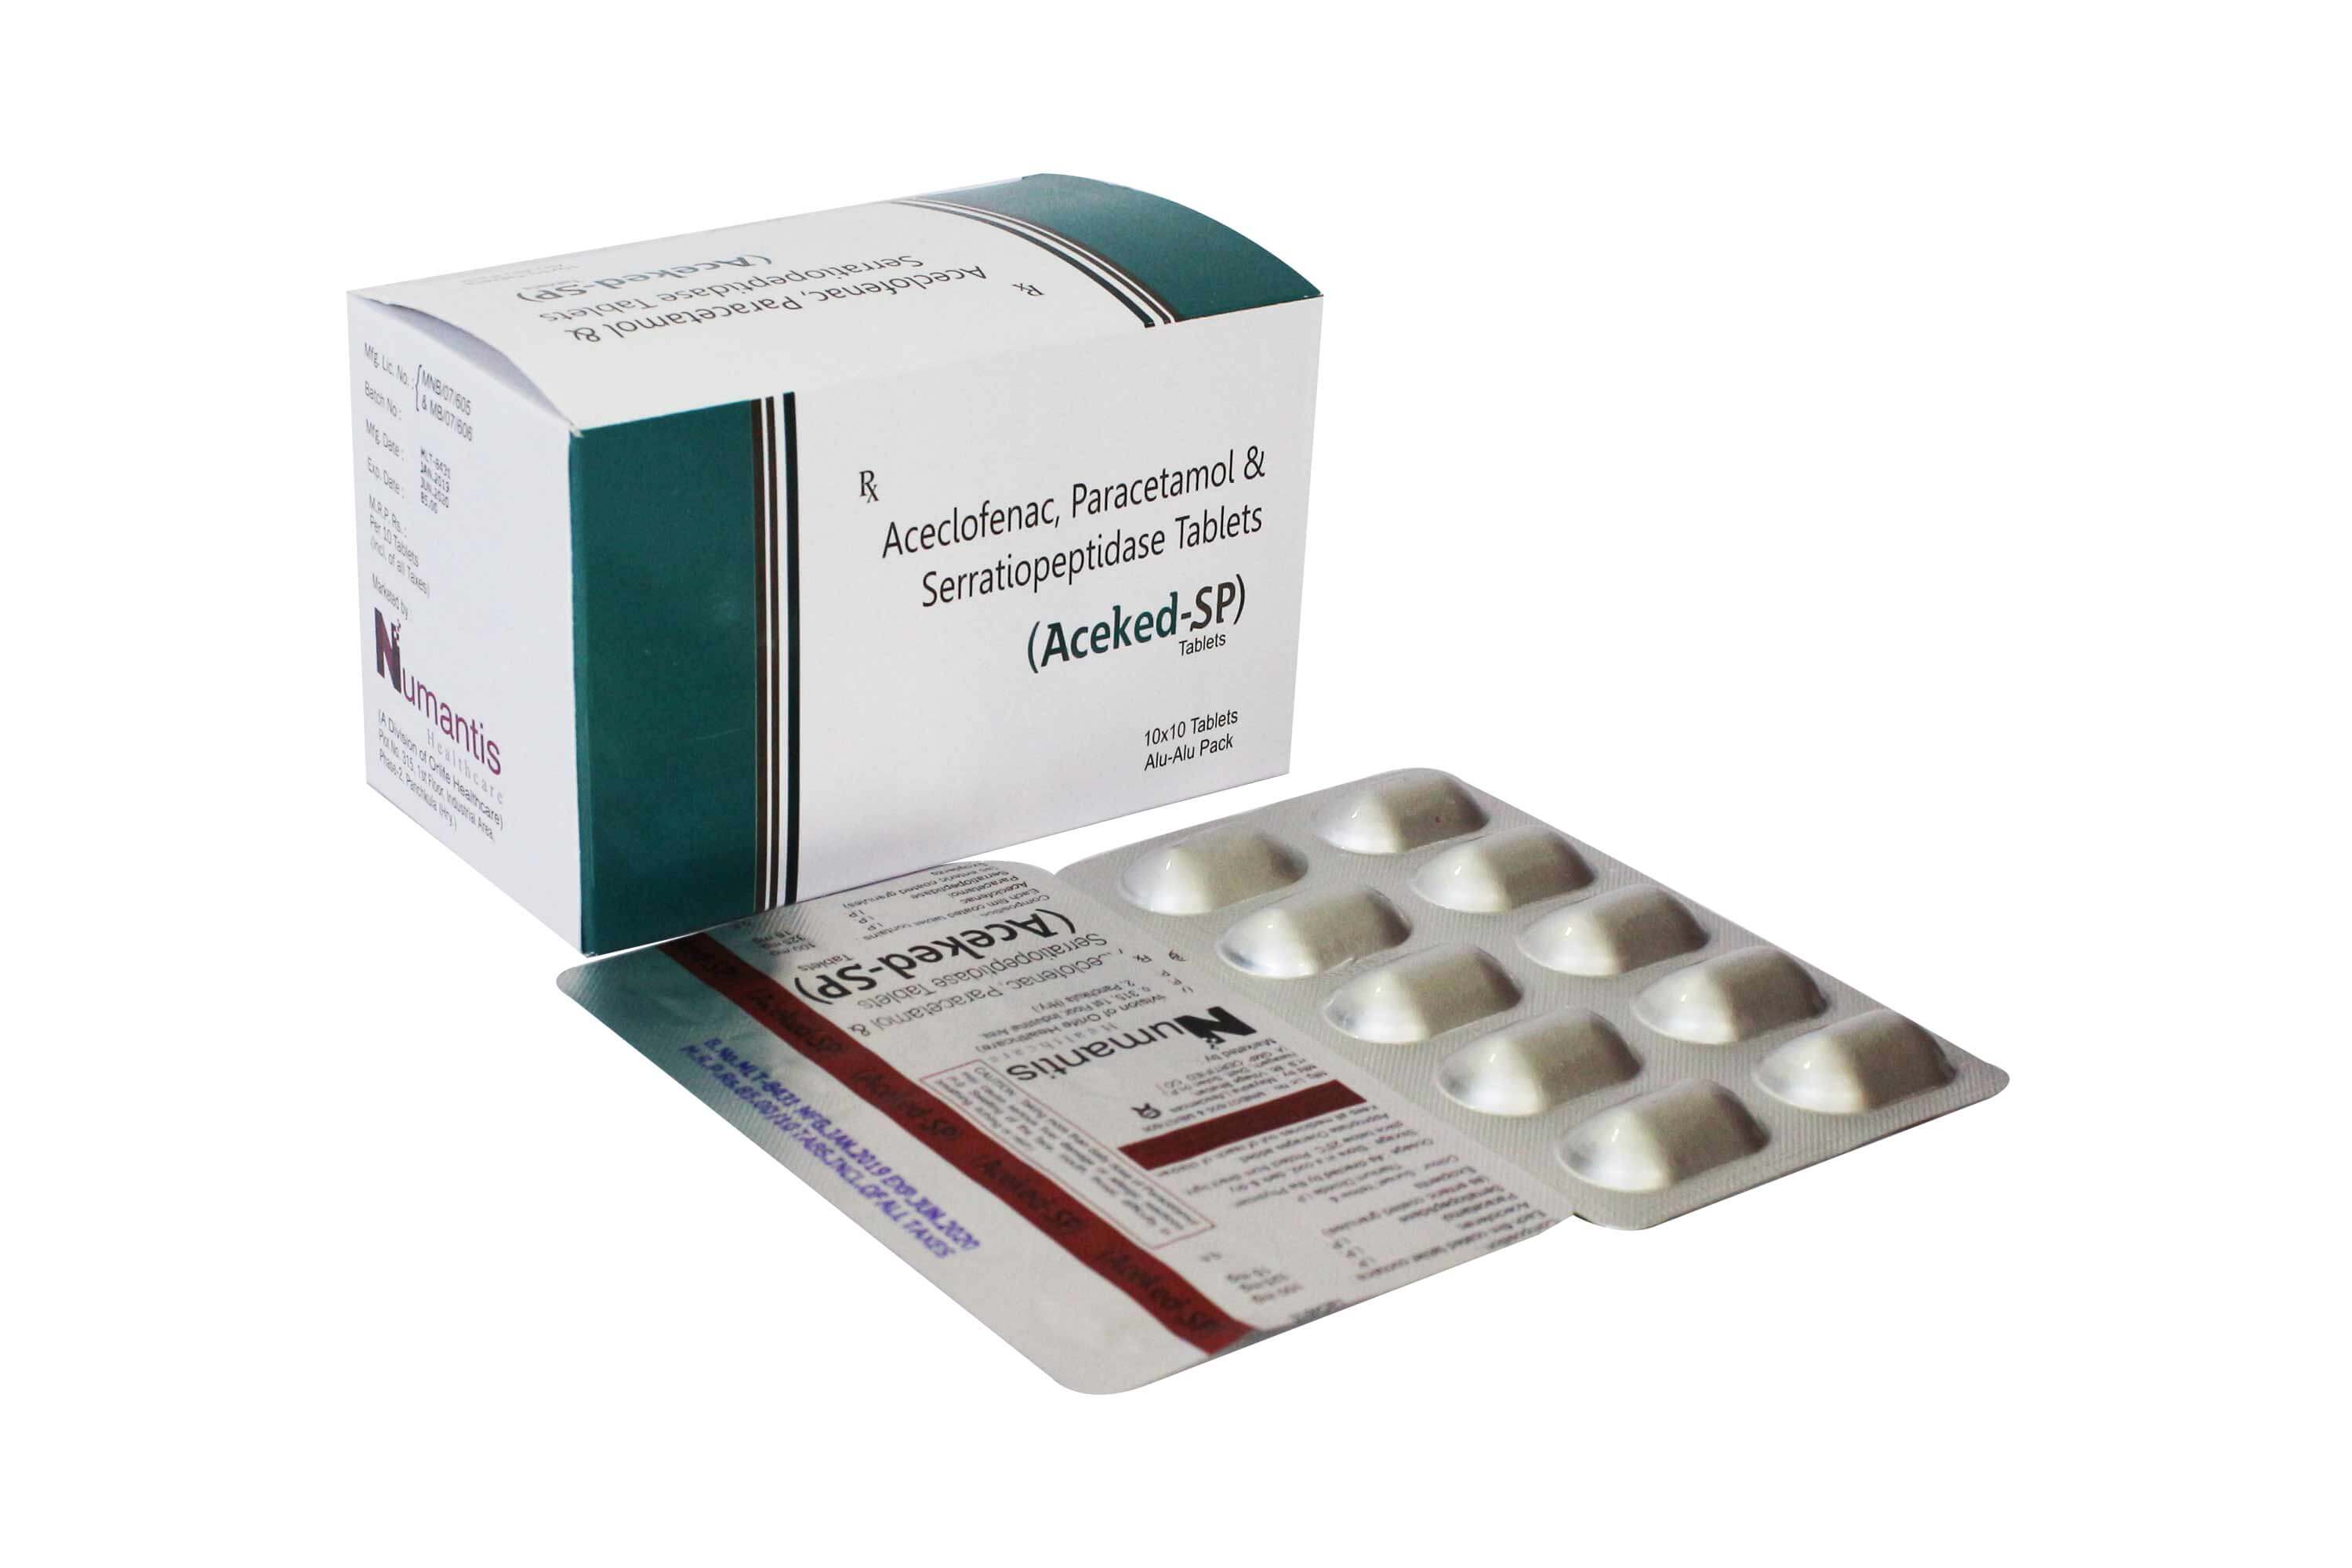 Product Name: Aceked SP, Compositions of Aceked SP are Aceclofenac & Paracetamol Serratiopeptidase Tablets - Numantis Healthcare